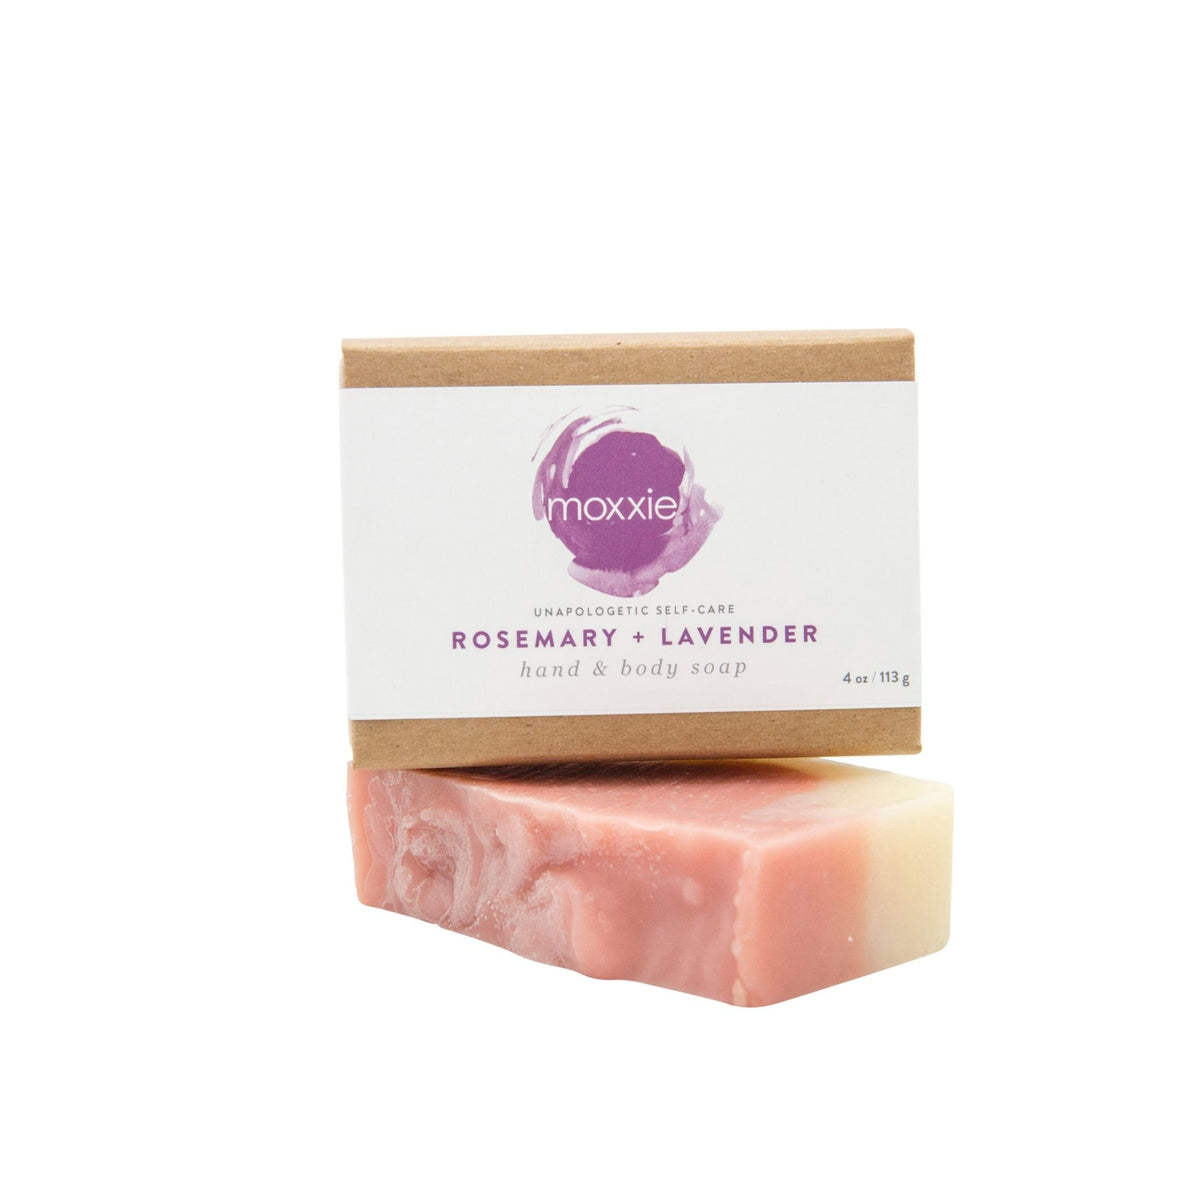 Moxxie all natural, hand and body Bar Soap in rosemary and lavender